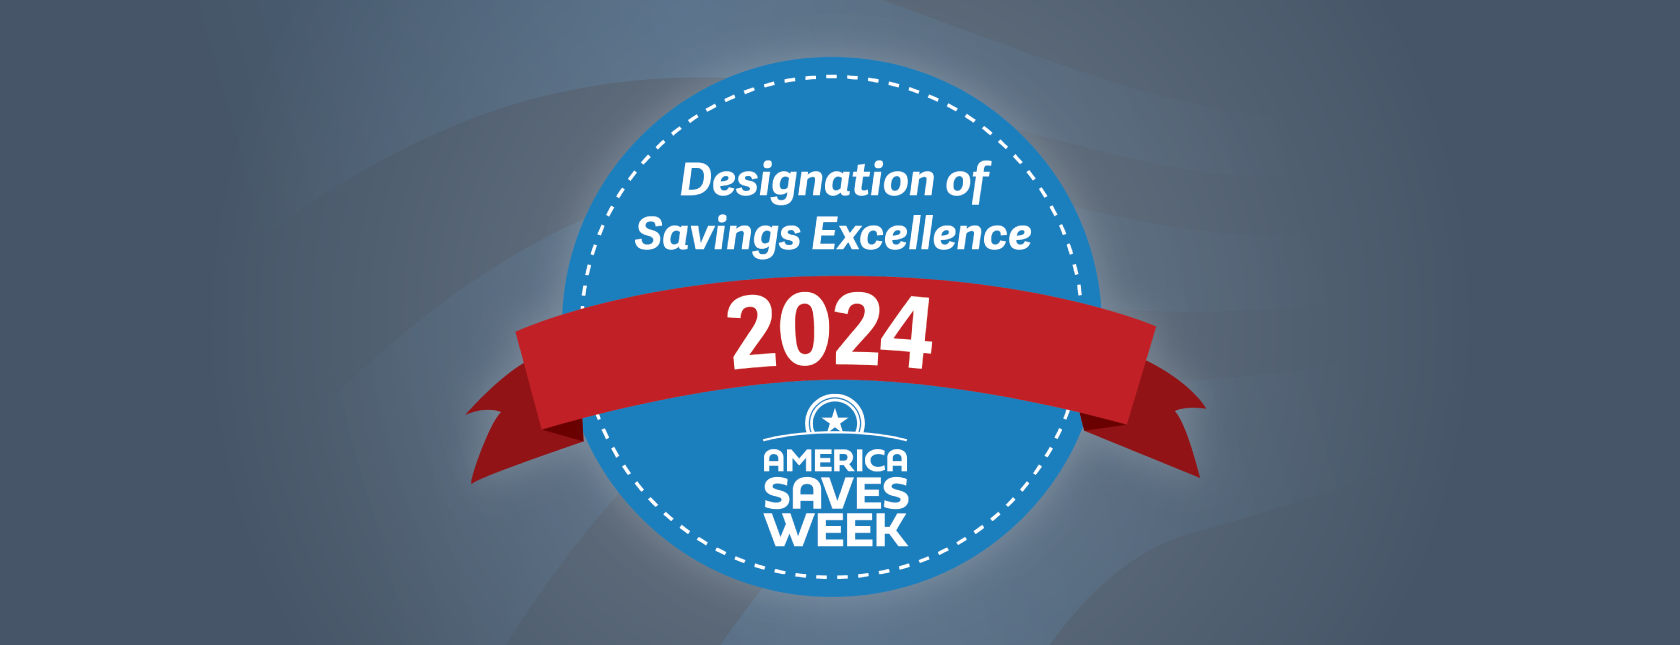 FNB EARNS DESIGNATION OF SAVINGS EXCELLENCE AWARD FROM AMERICA SAVES FOR THIRD YEAR